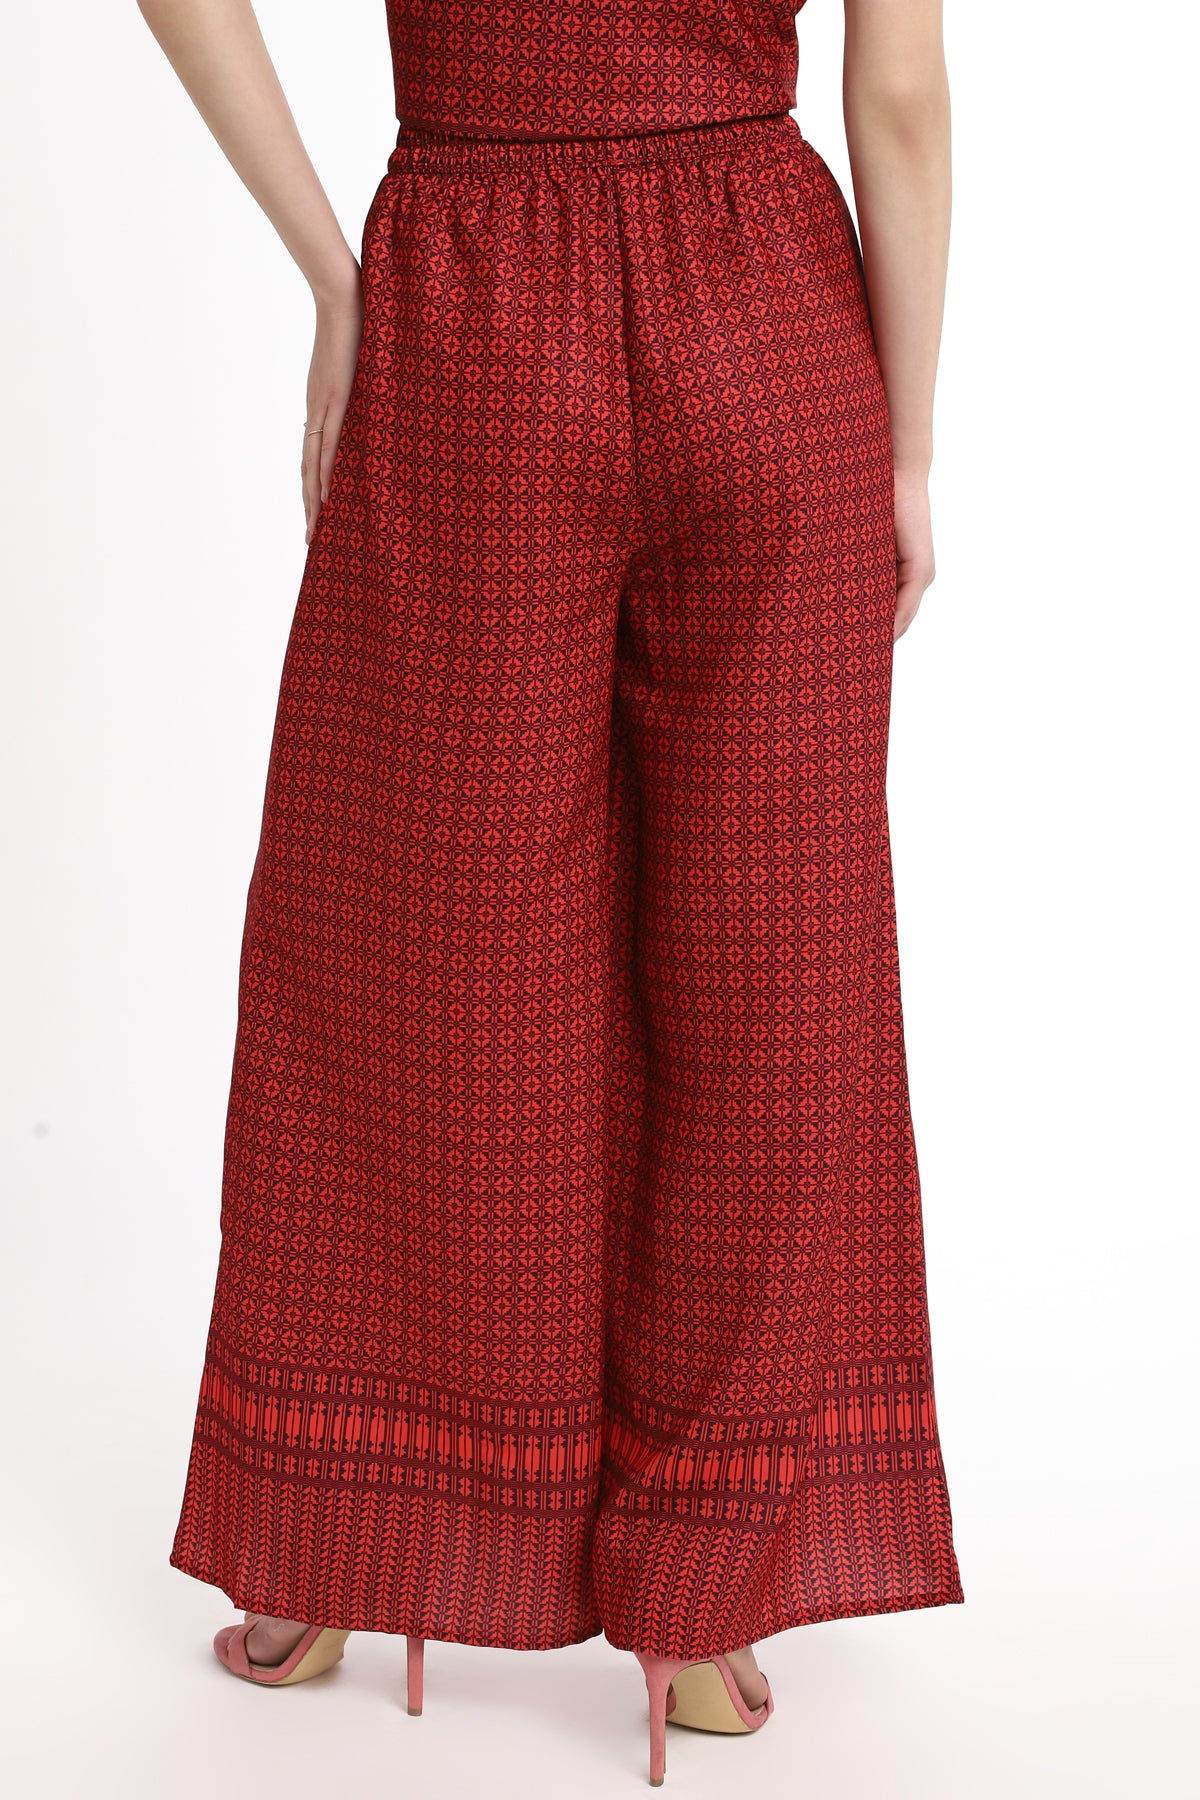 Wide Leg trouser with elasticated waist band in Ankle Length